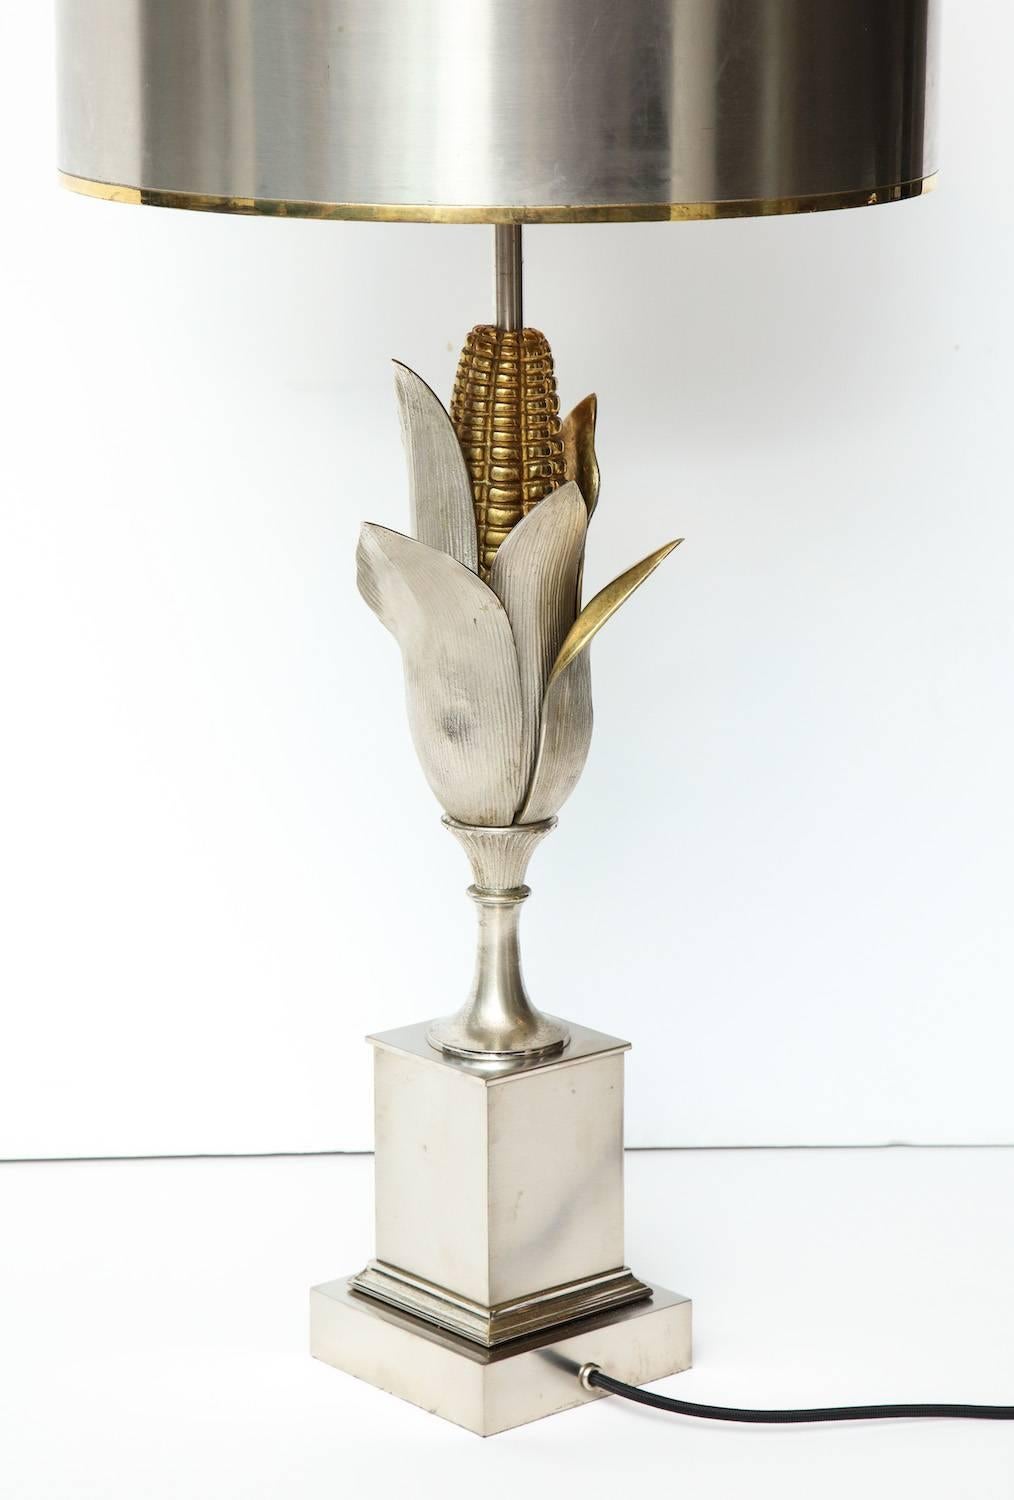 Sweet Corn table lamp by Charles et Fils.
Sculptural lamp of silvered bronze in the form of a husk of corn. Raised on a pedestal base, with three candelabra sockets and original metal shade. Stamped on the lower rear.